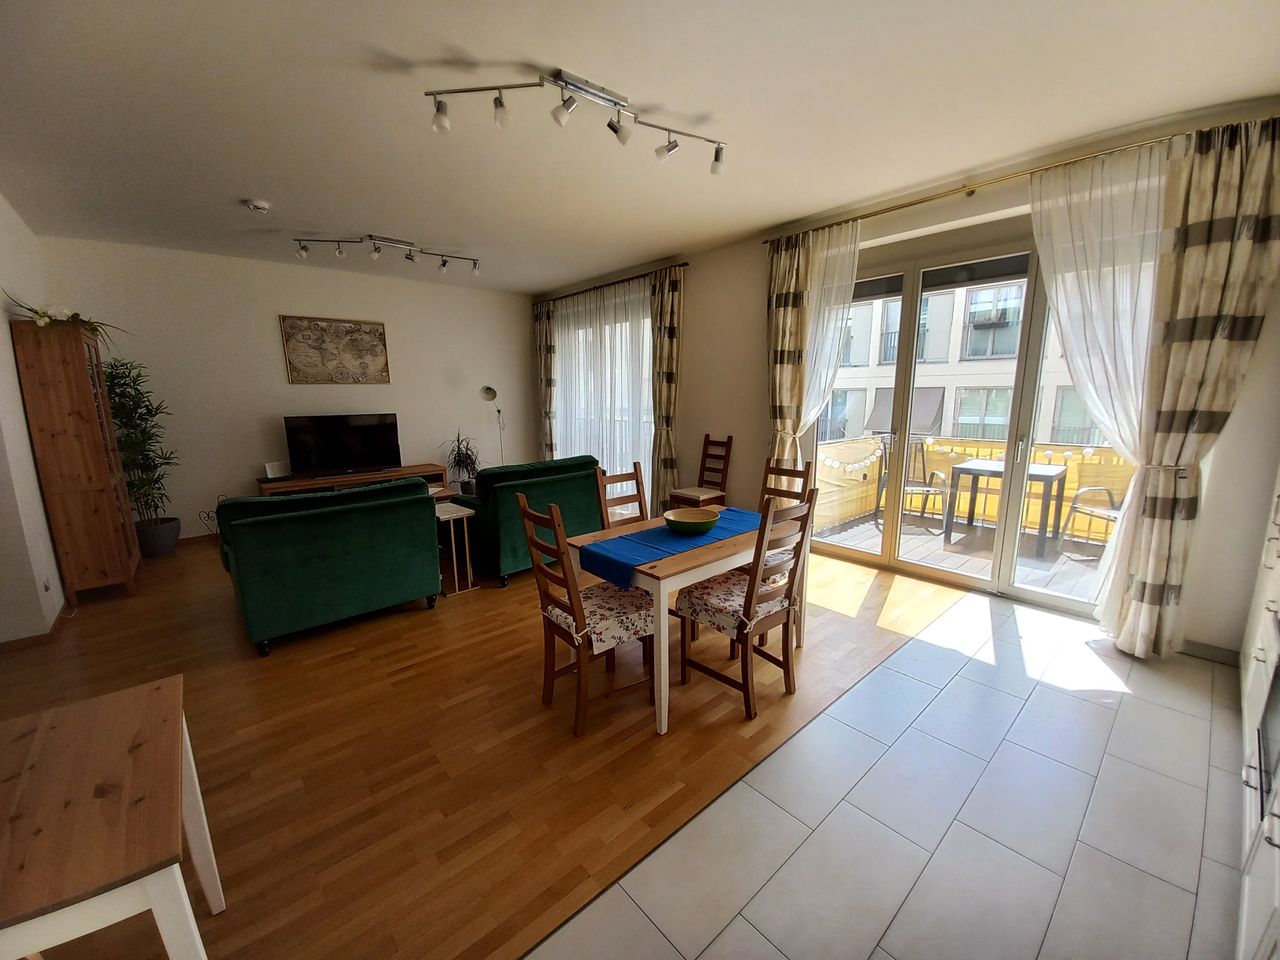 Modern 3 Room Apartment in the old Schultheiss Brewery